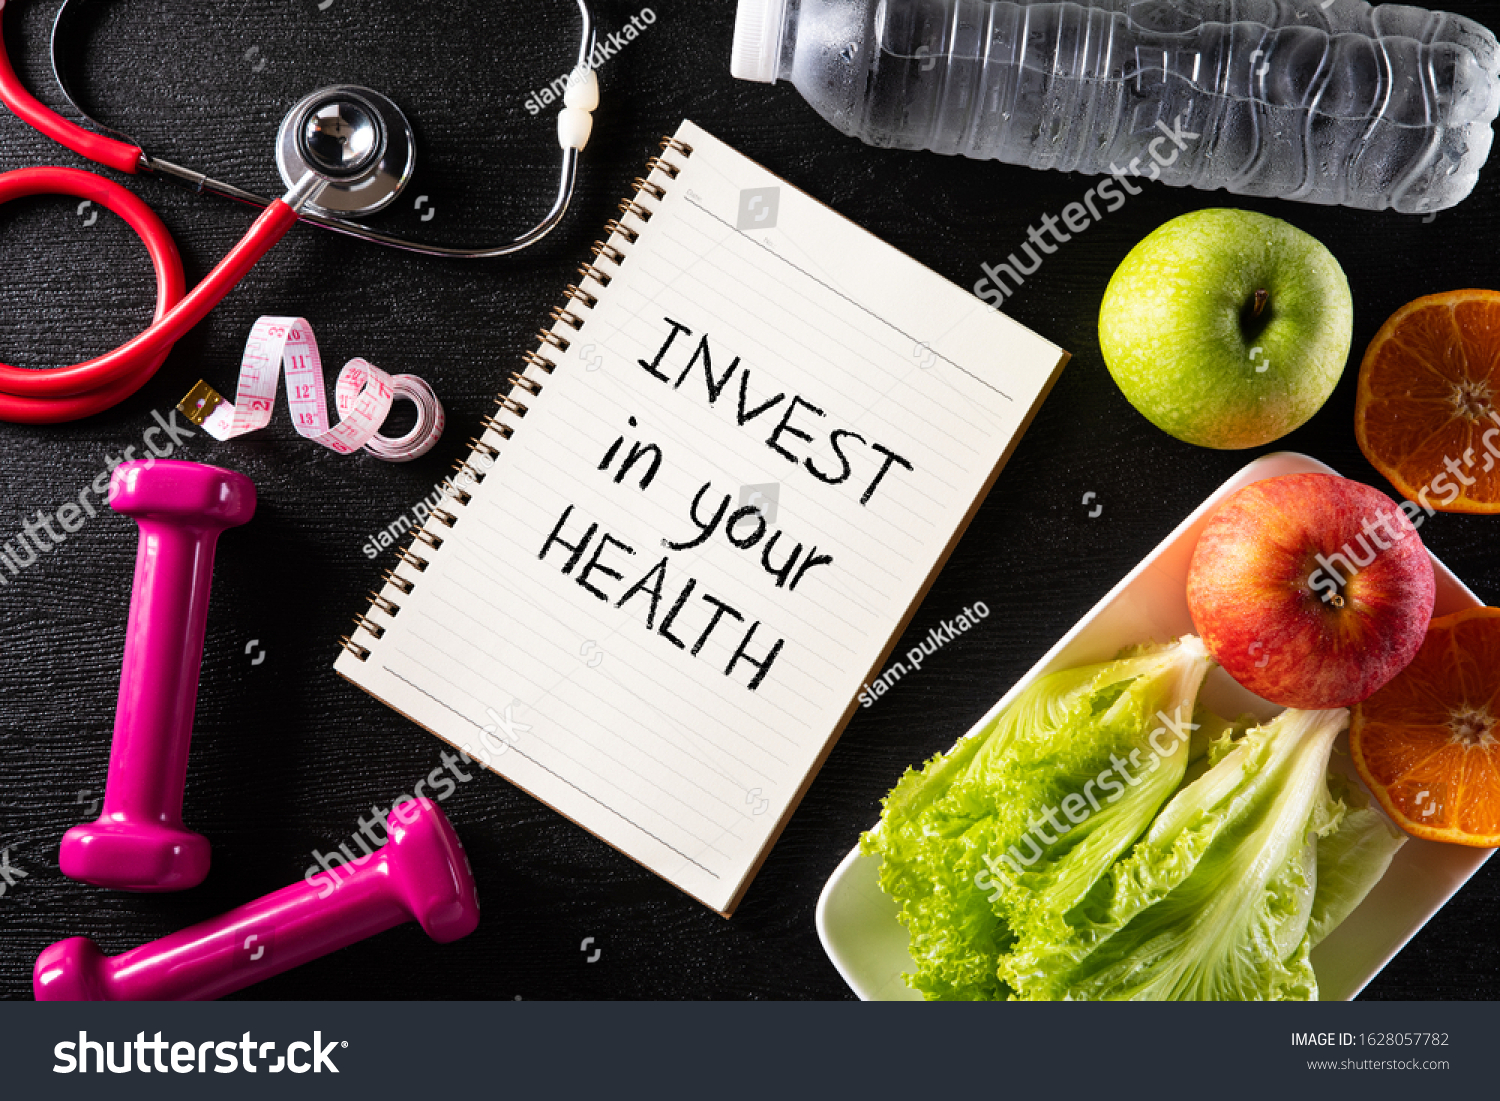 Healthy Lifestyle Food Sport Concept Top Stock Photo 1628057782 ...